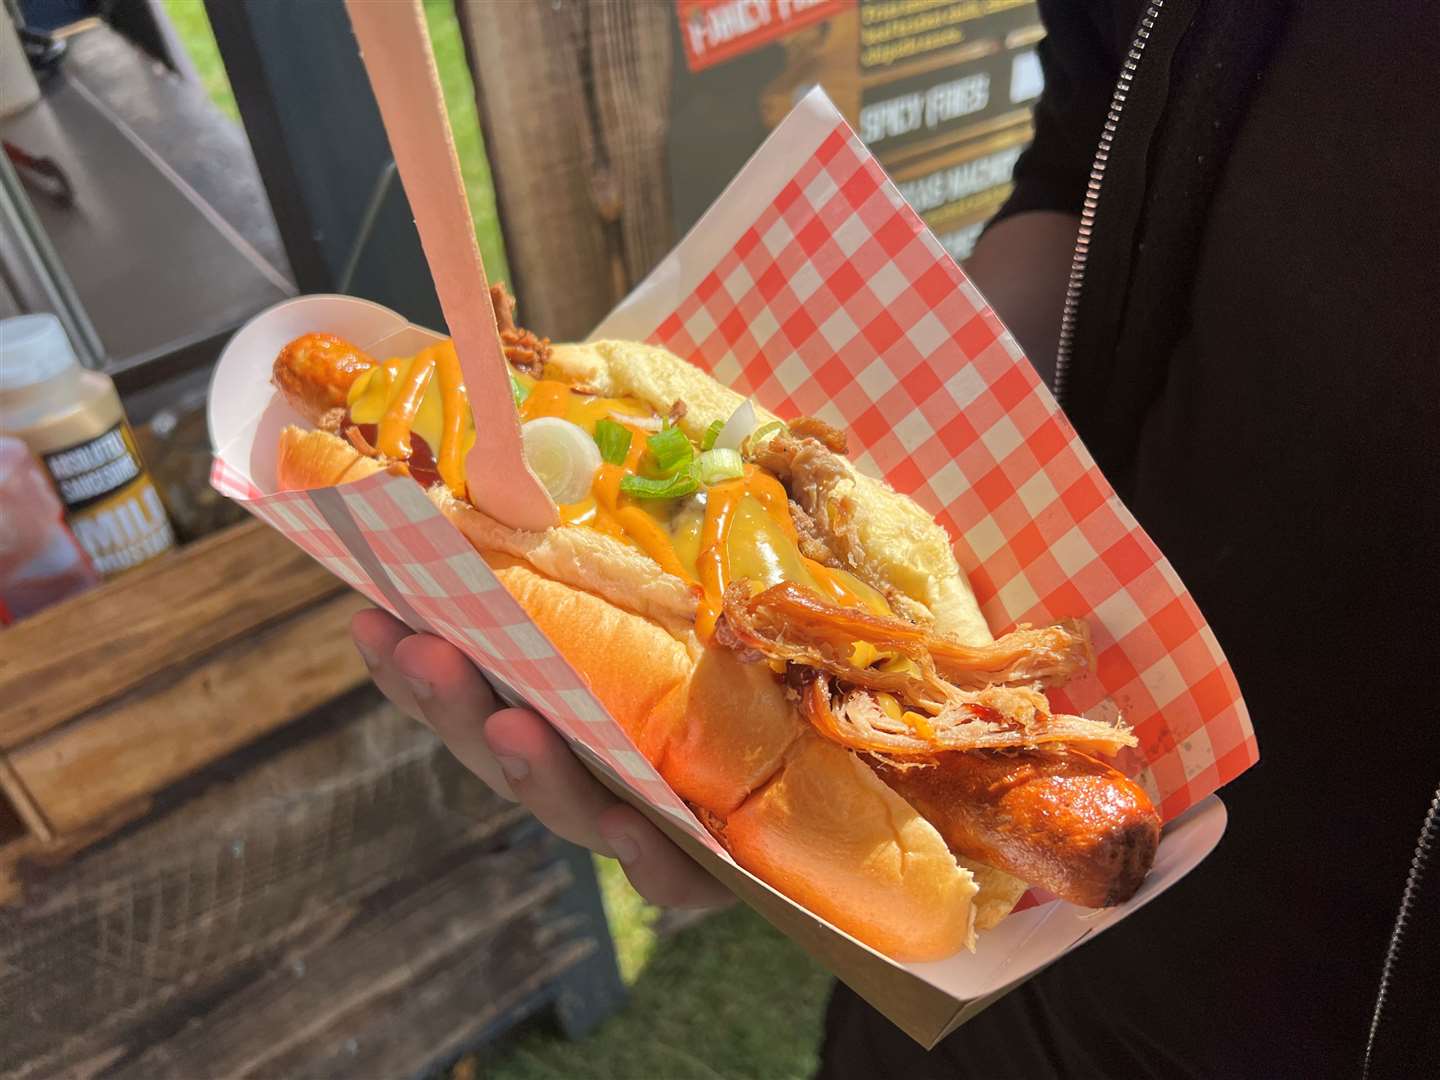 Food served at the Maid of Stone festival. Picture: Megan Carr